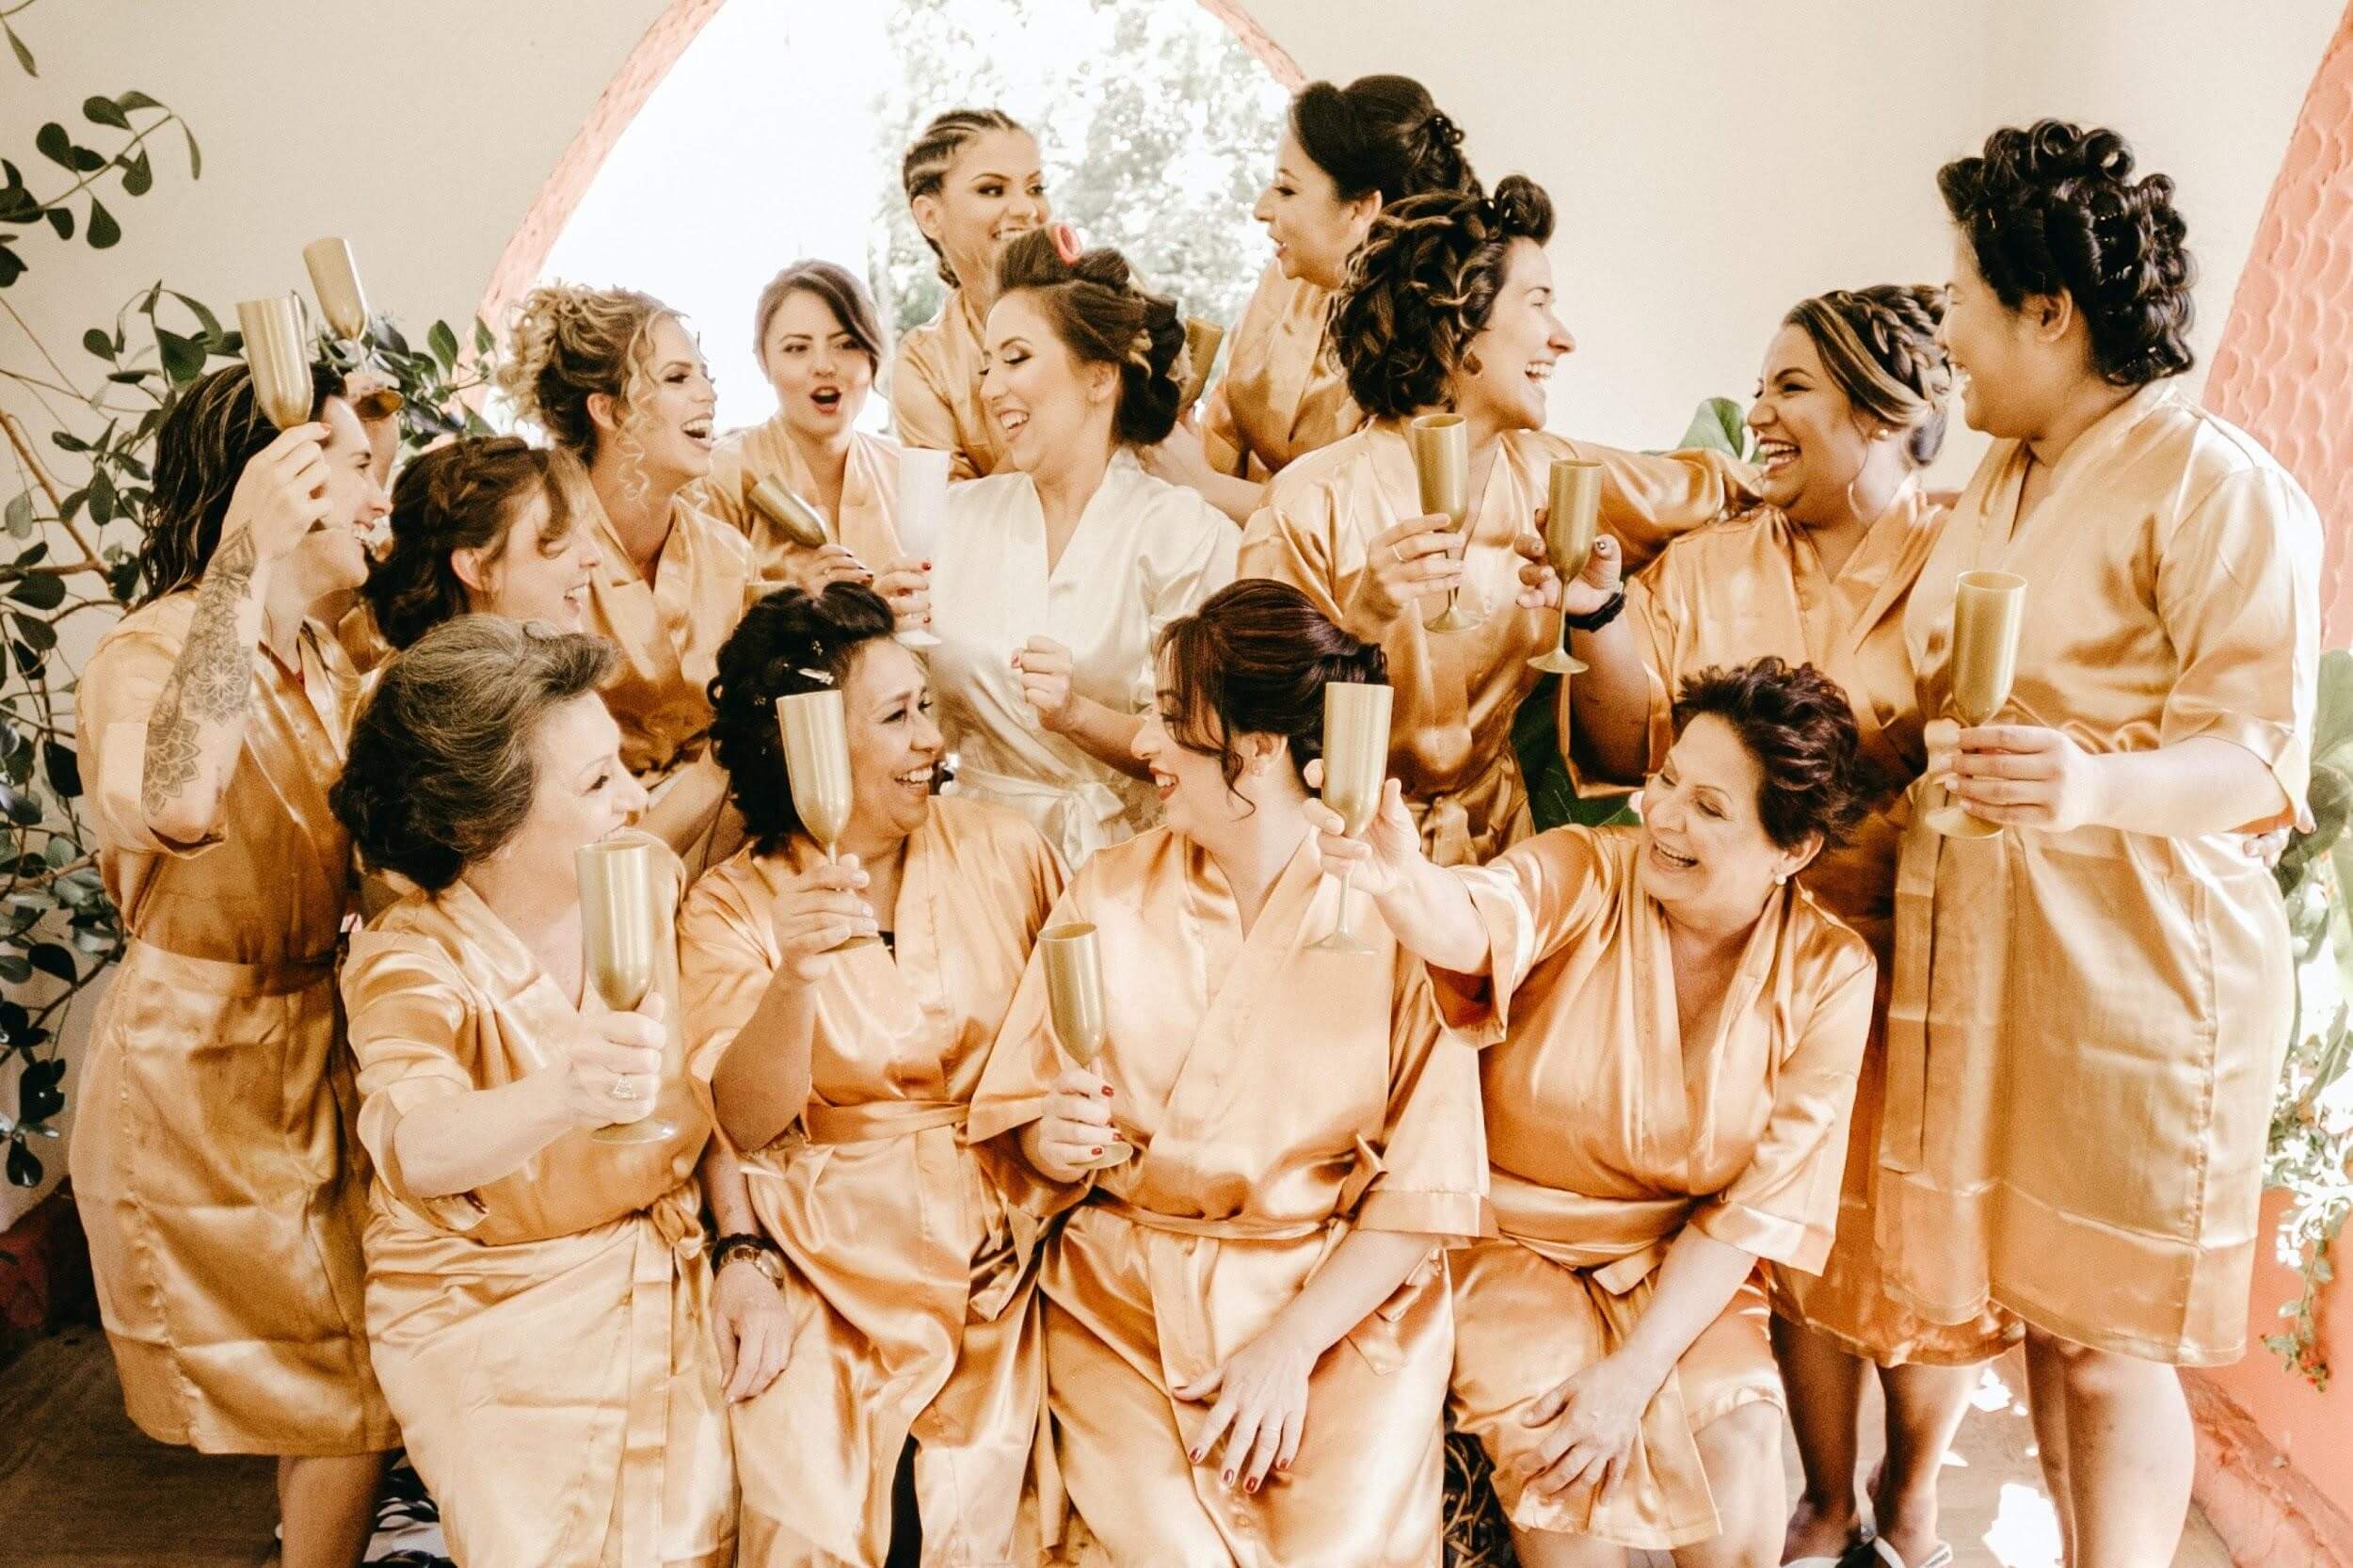 Women in bathrobe and hold champagne